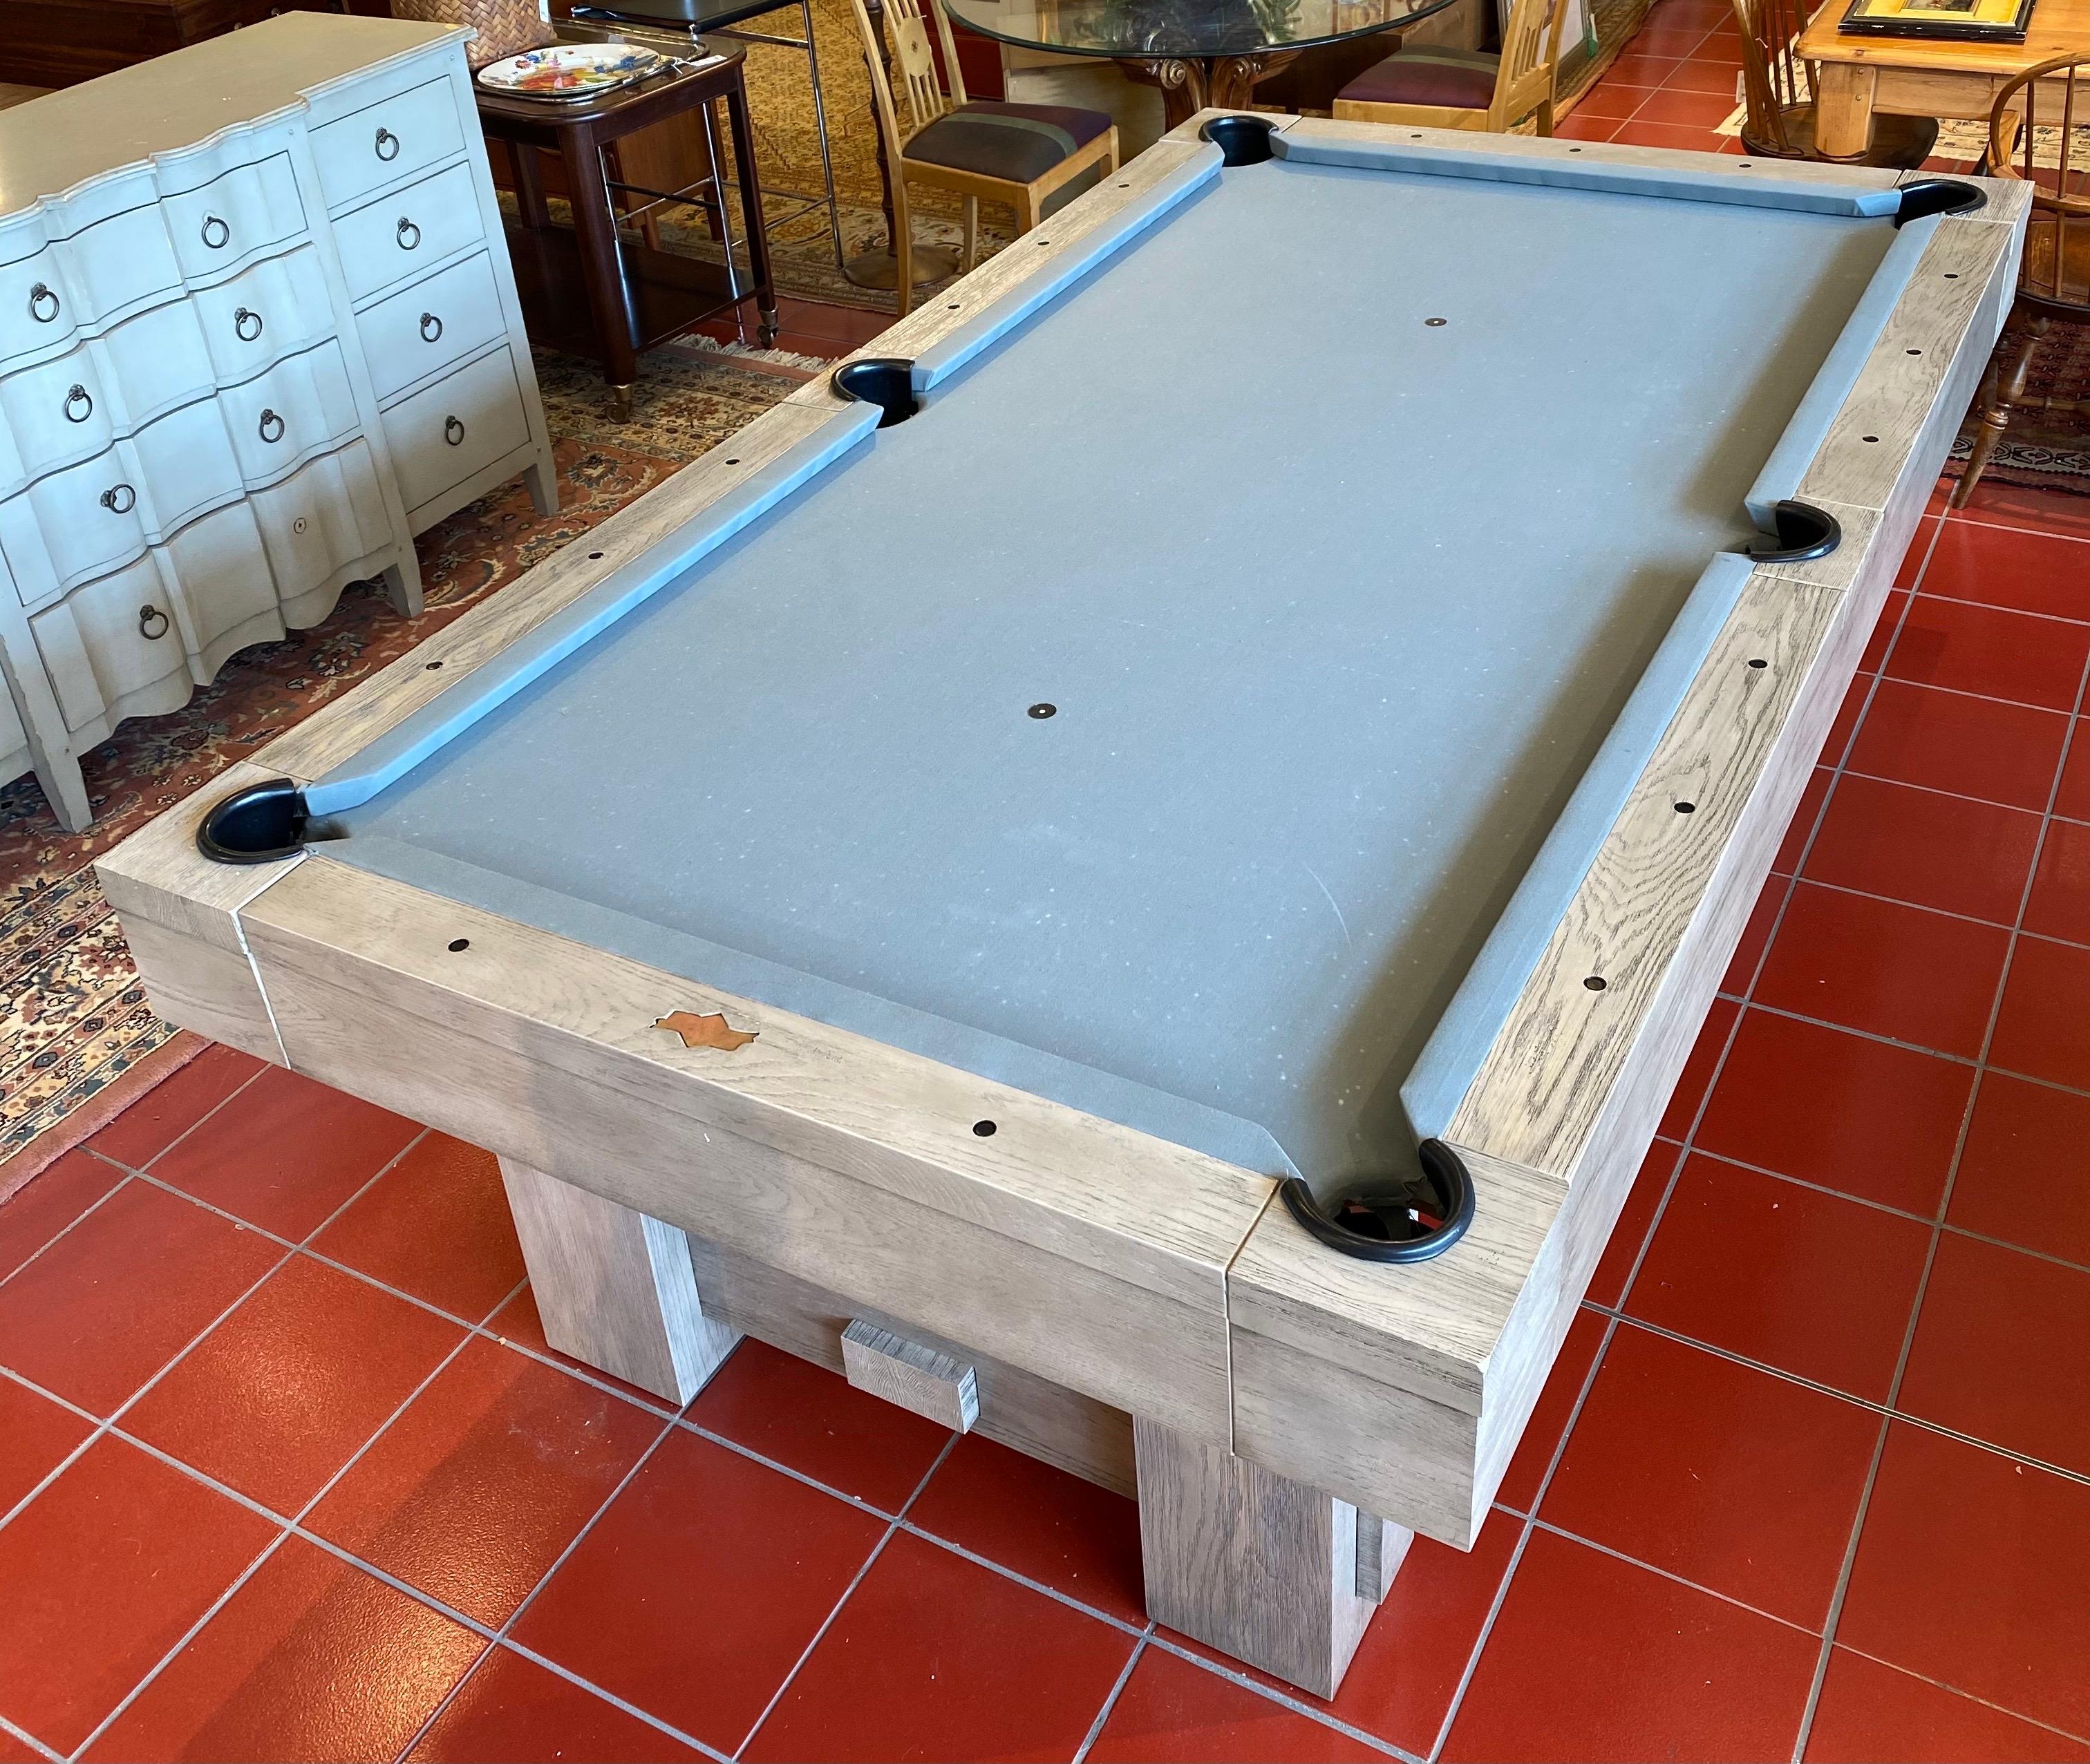 Post and beam design weathered finish pool table.

Measures: 100